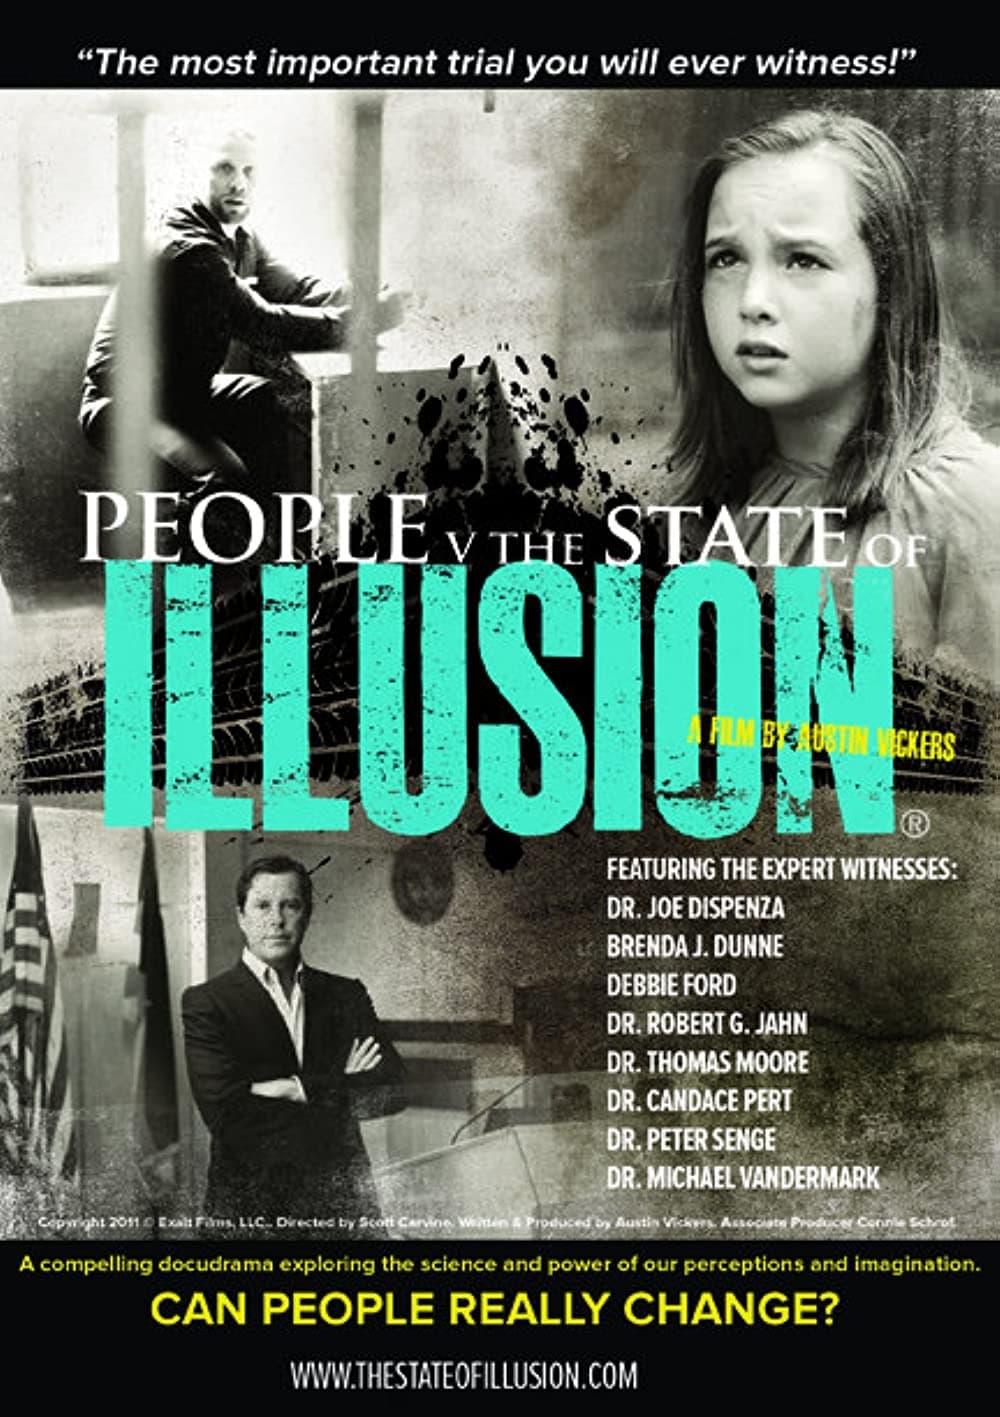 People vs. the State of Illusion